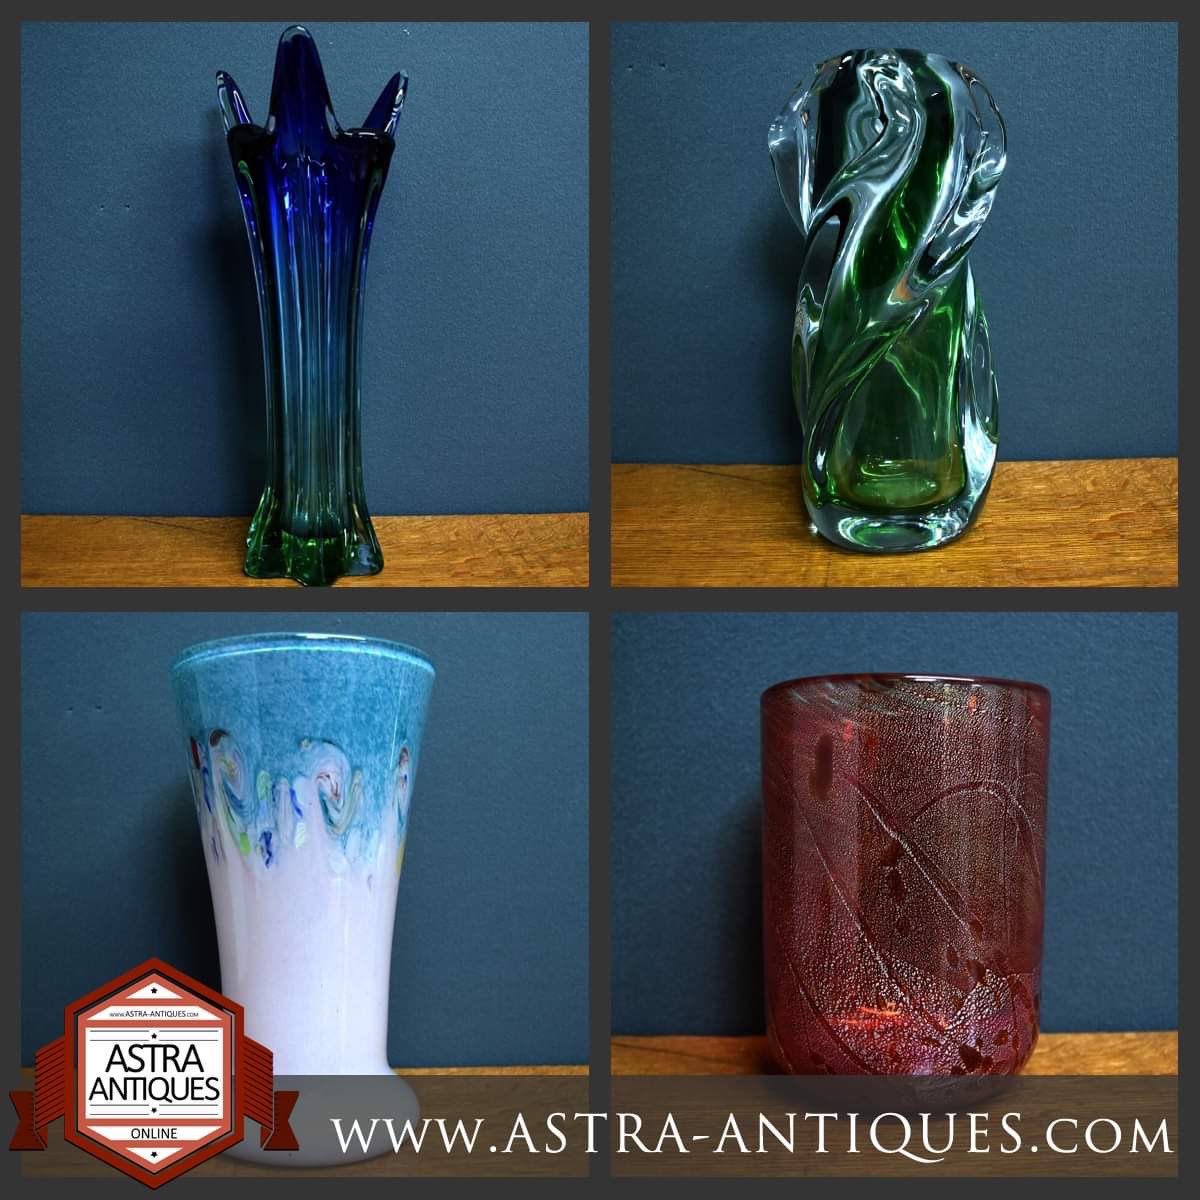 New items added to the website Astra-antiques.com #jankotic #muranovase #vasart #glassware #astraantiquescentre #hemswell #lincolnshire